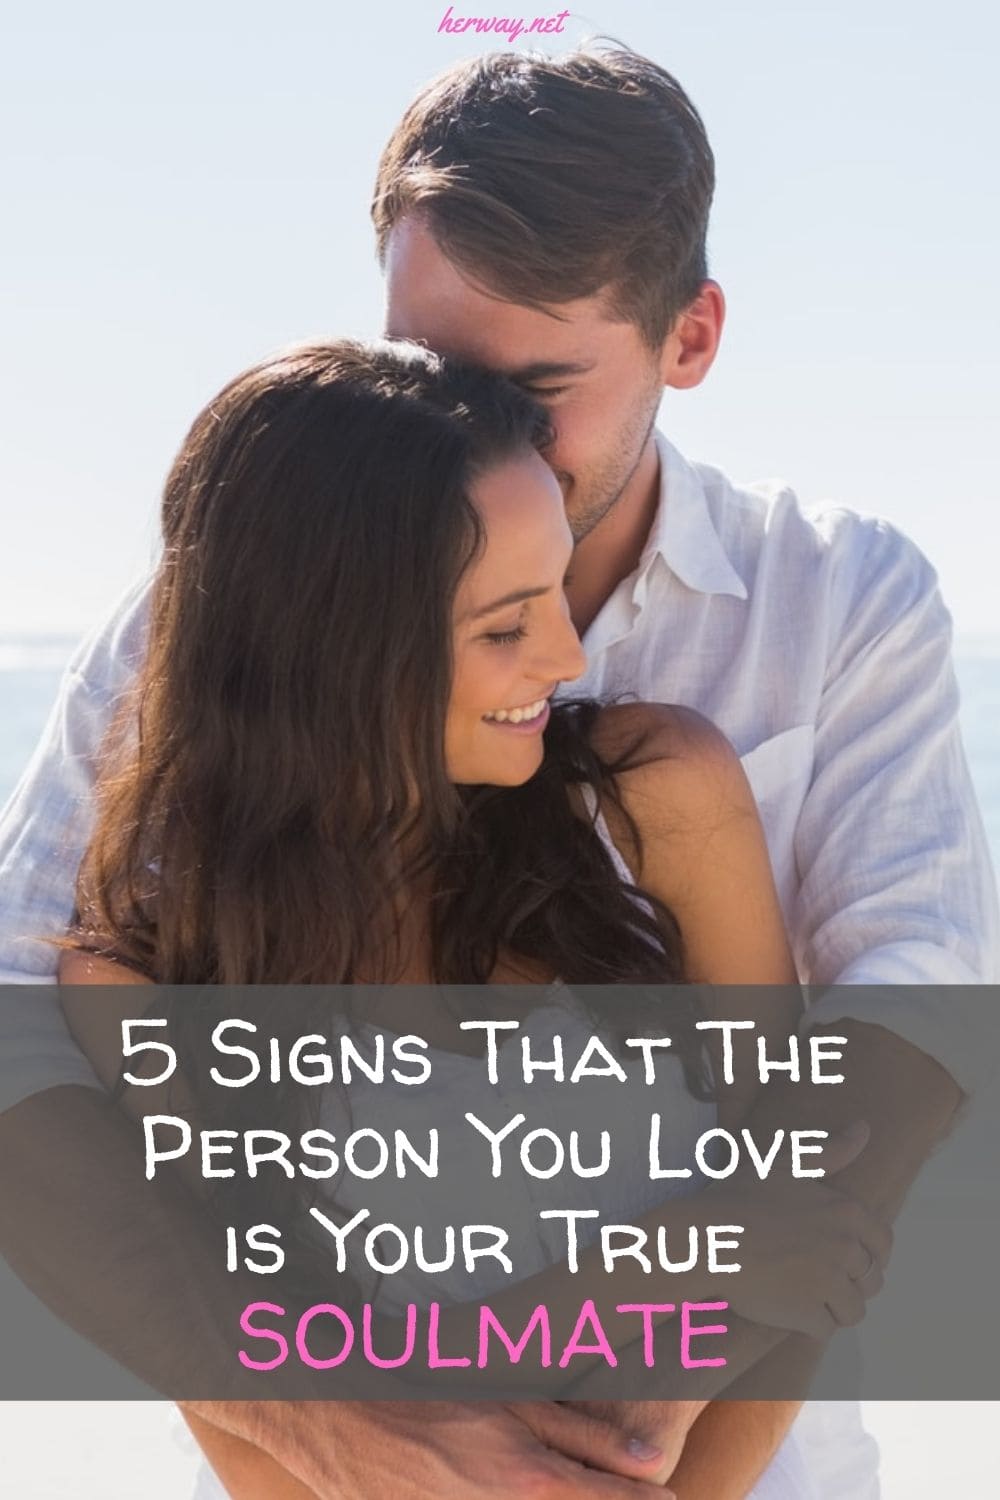 5 Signs That The Person You Love is Your True SOULMATE